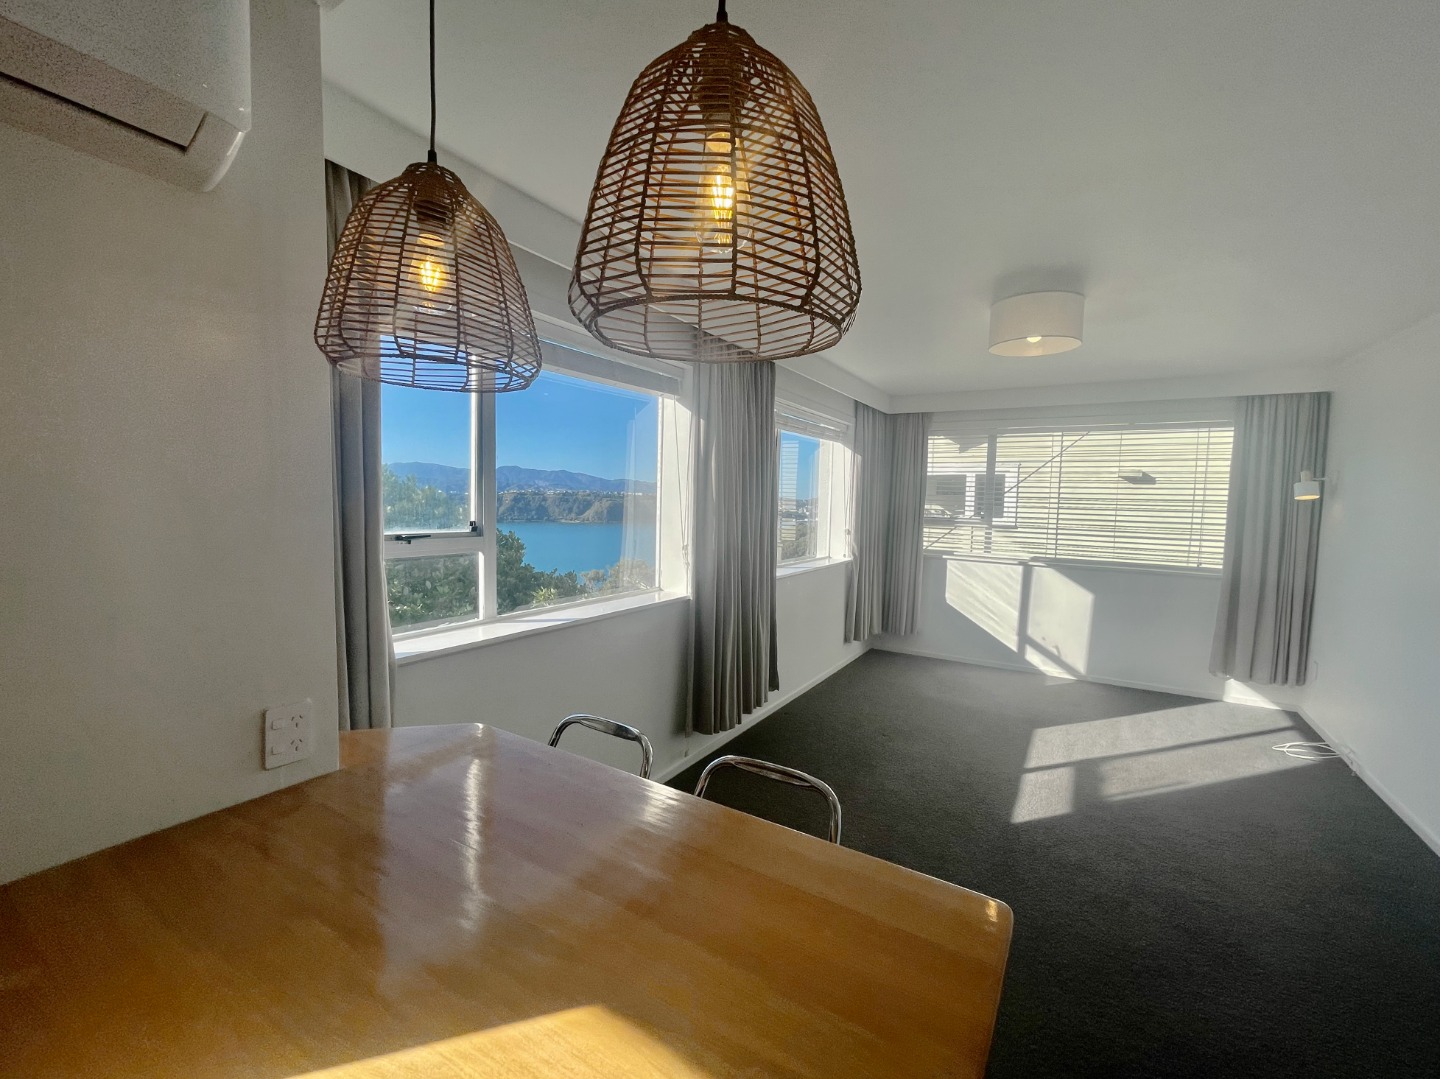 Real Estate For Rent Houses & Apartments : Sunny 1-Bedroom Apartment with Stunning Panoramic harbor Views, Wellington